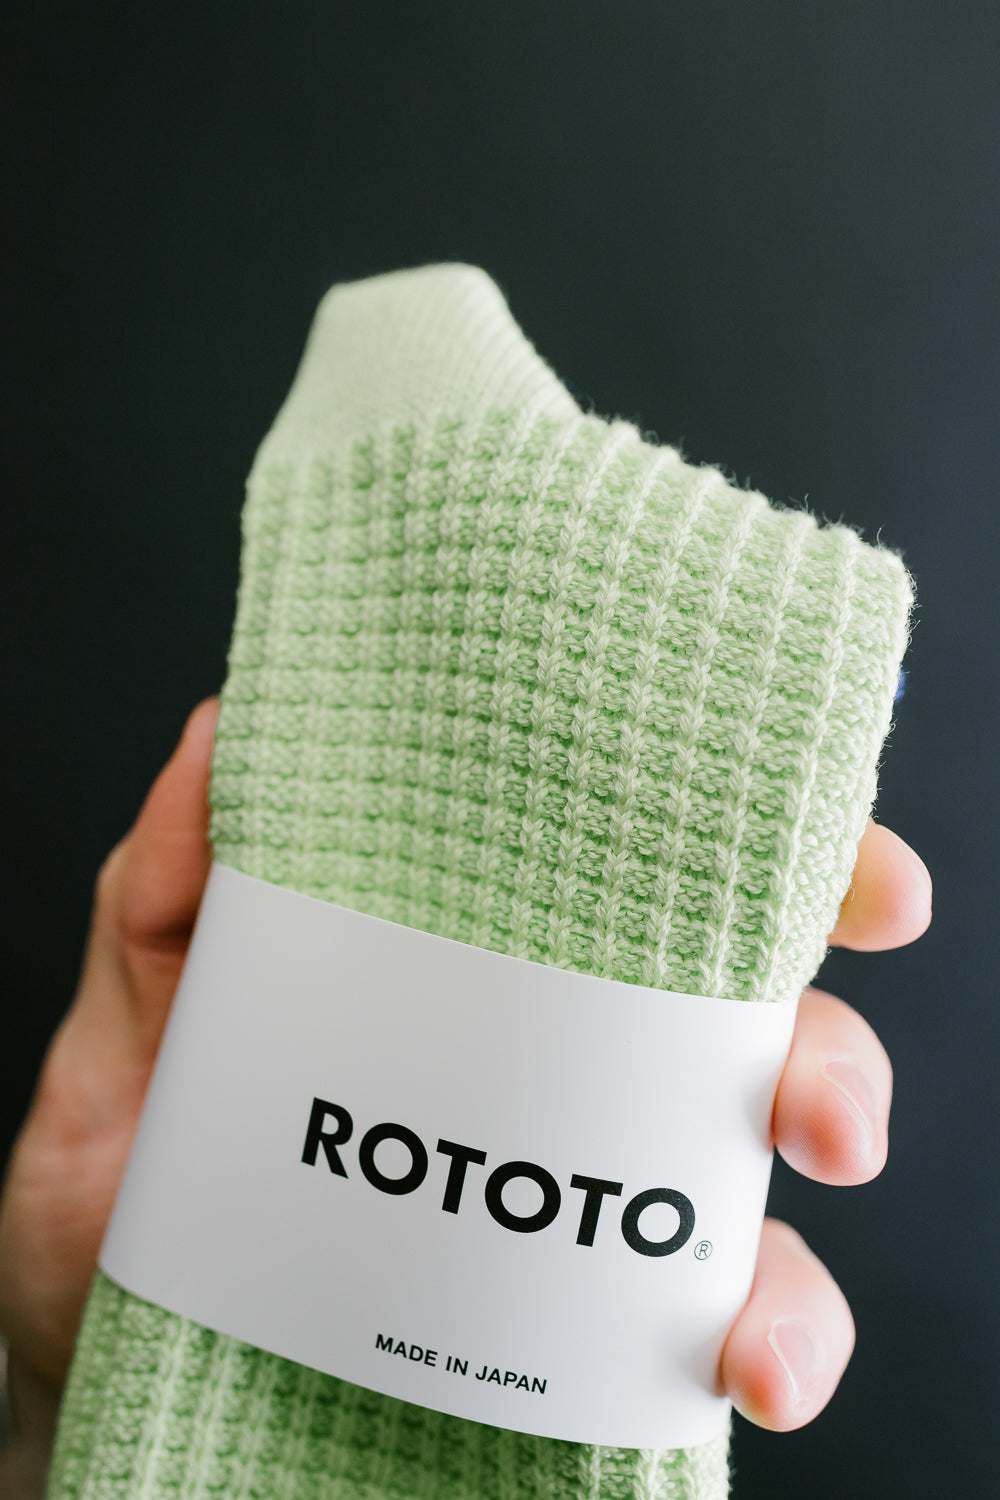 R1110 - Waffle Cotton Crew Sock - Lime